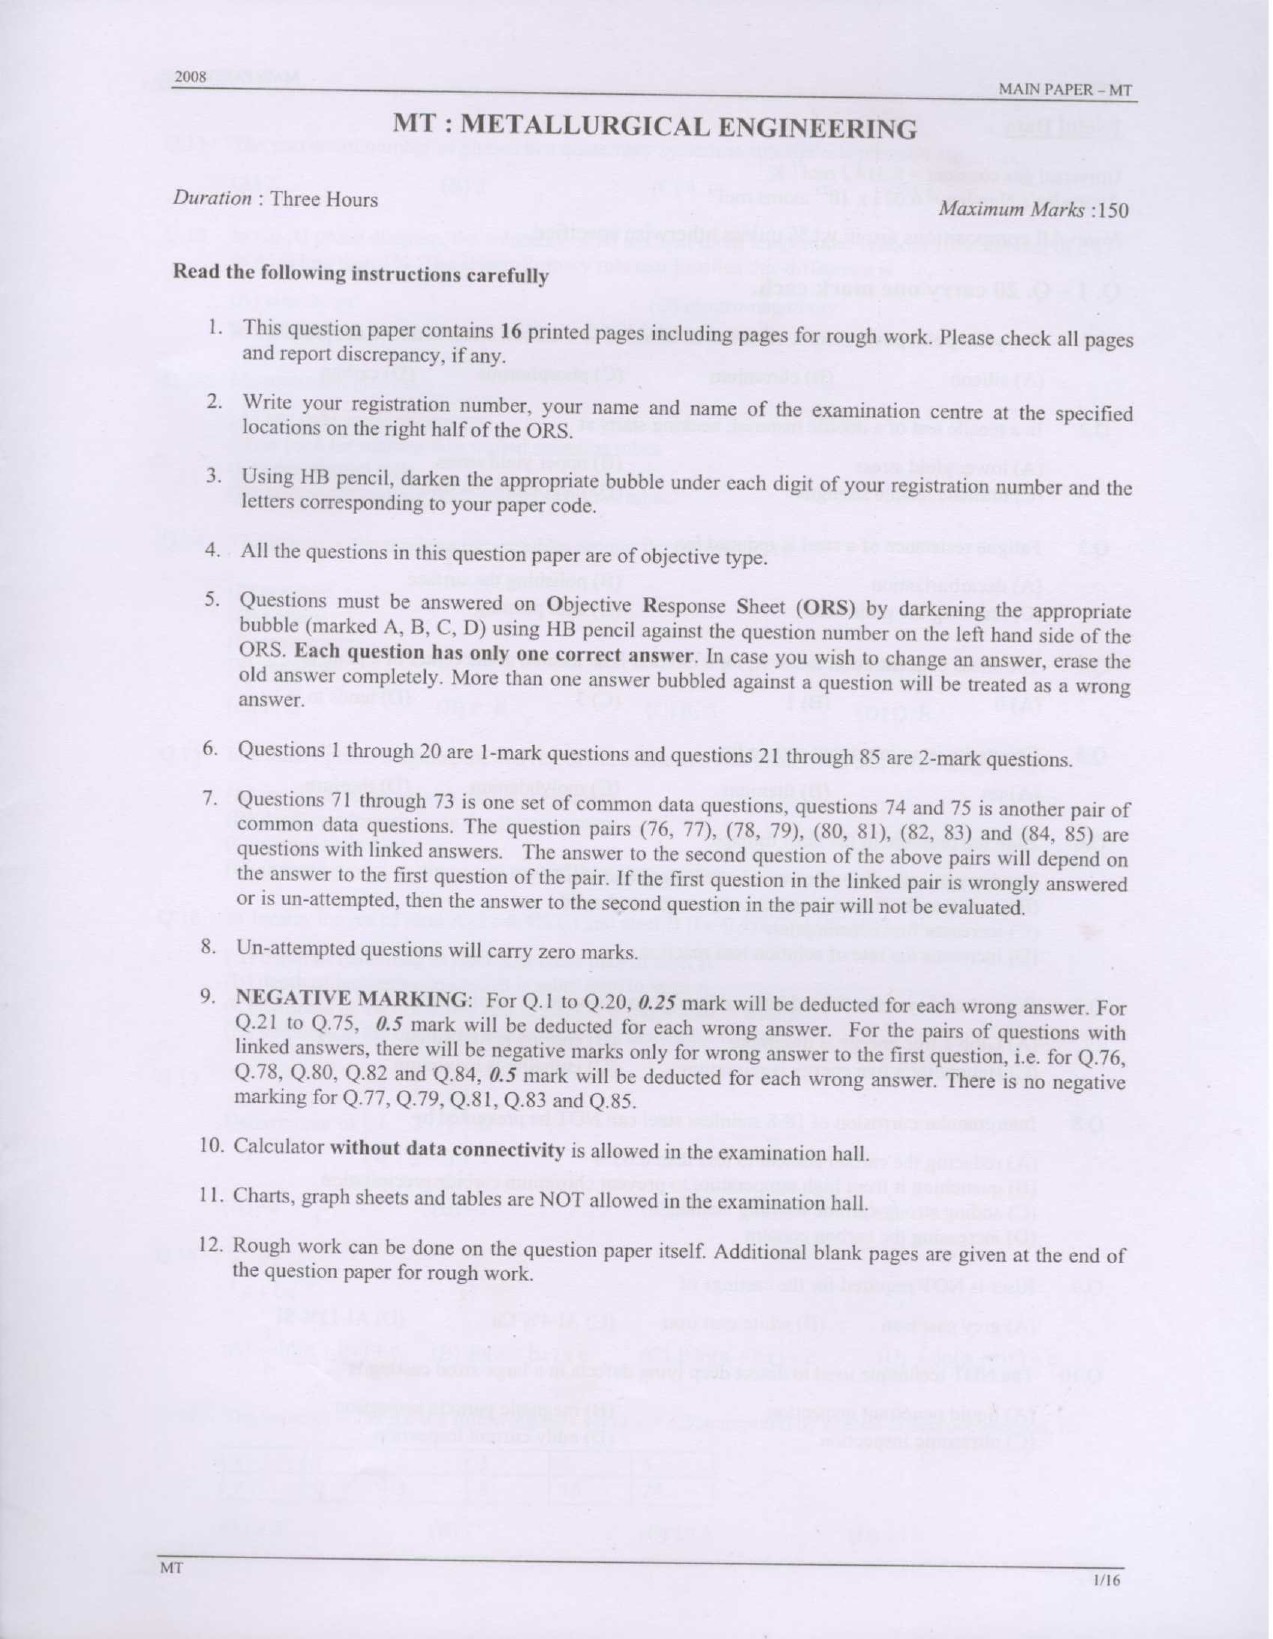 GATE Exam Question Paper 2008 Metallurgical Engineering 1